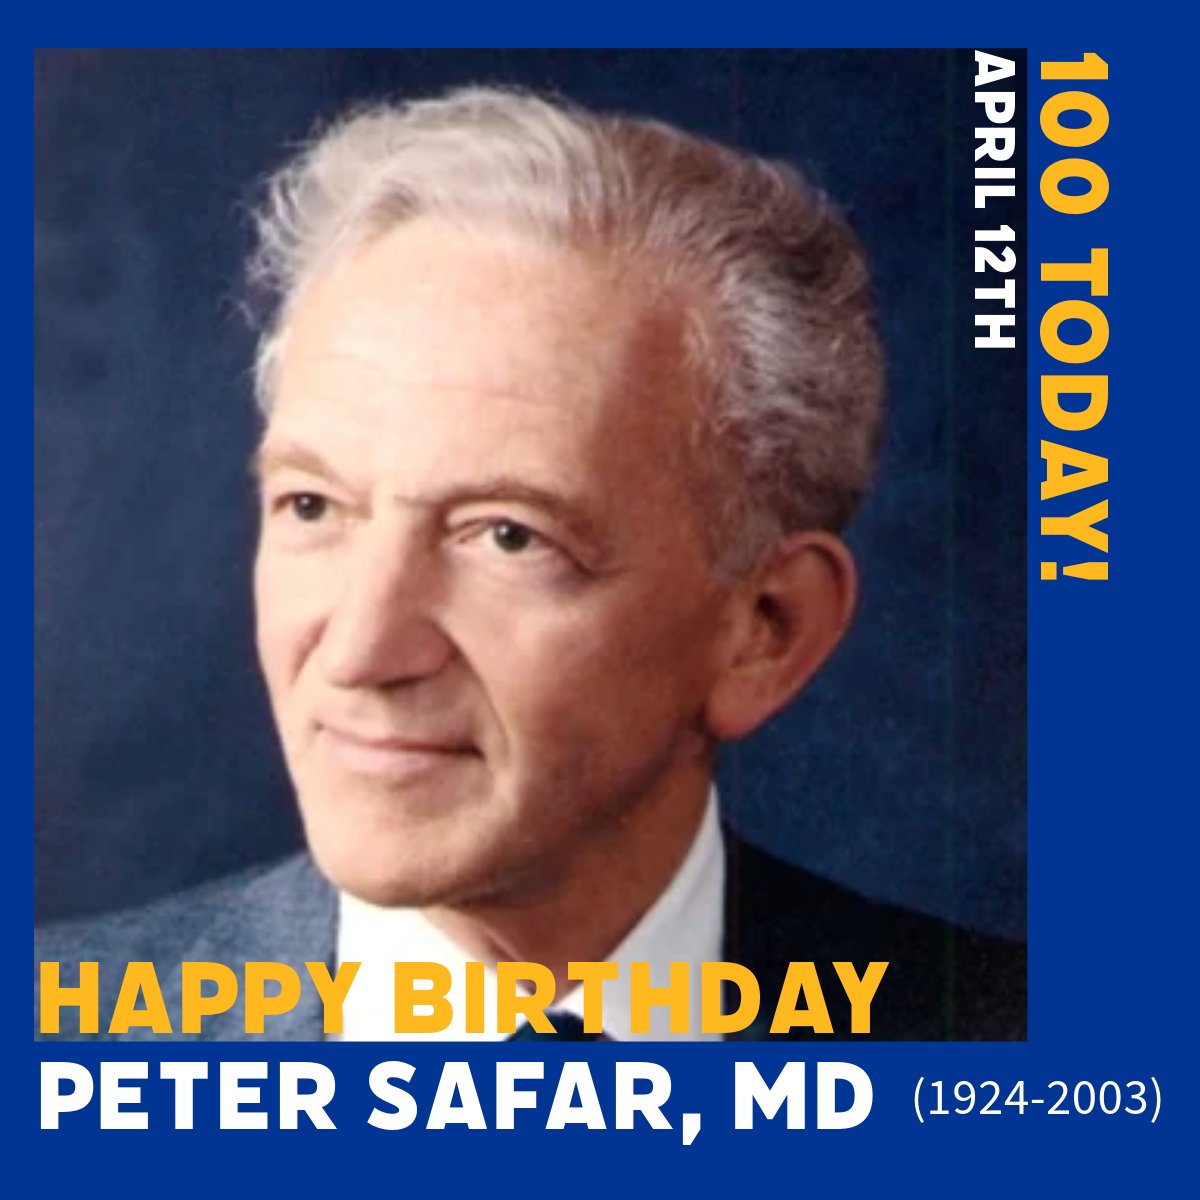 Today would have been Dr. Safar's 100th birthday! Dr. Safar pioneered the development of the ABCs (airway, breathing, circulation) of resuscitation, including the technique of “mouth-to-mouth” resuscitation. #Happy100thbirthday #resuscitation #ccm #proud #upmc #safar #CPR #Pitt